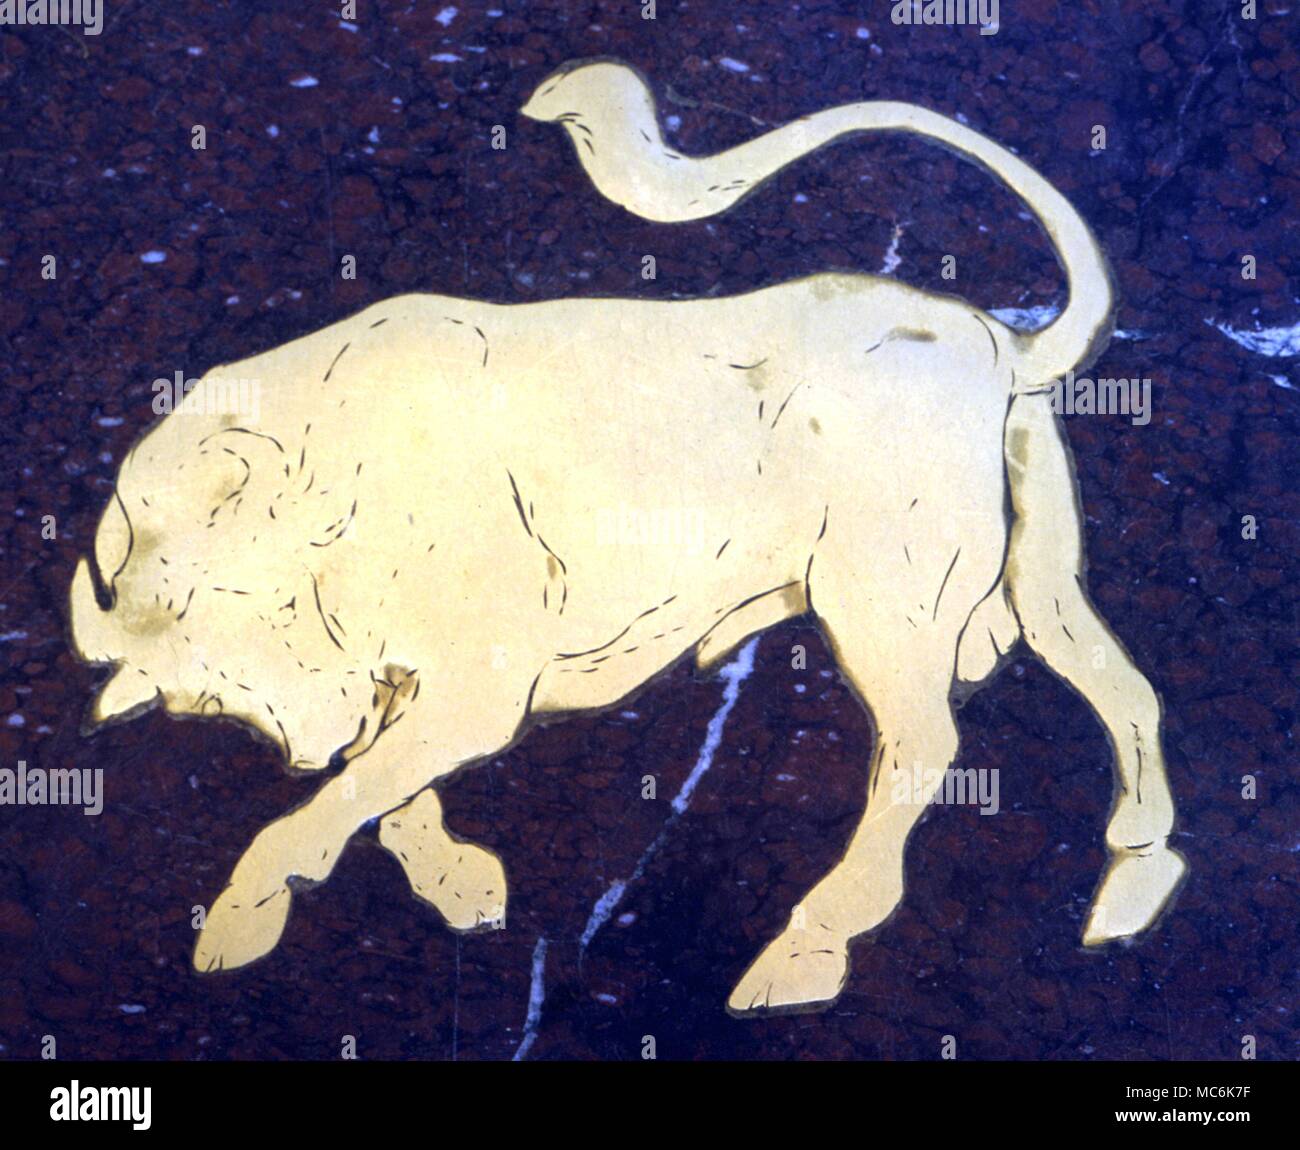 Astrology - Zodiacal signs Taurus Stock Photo